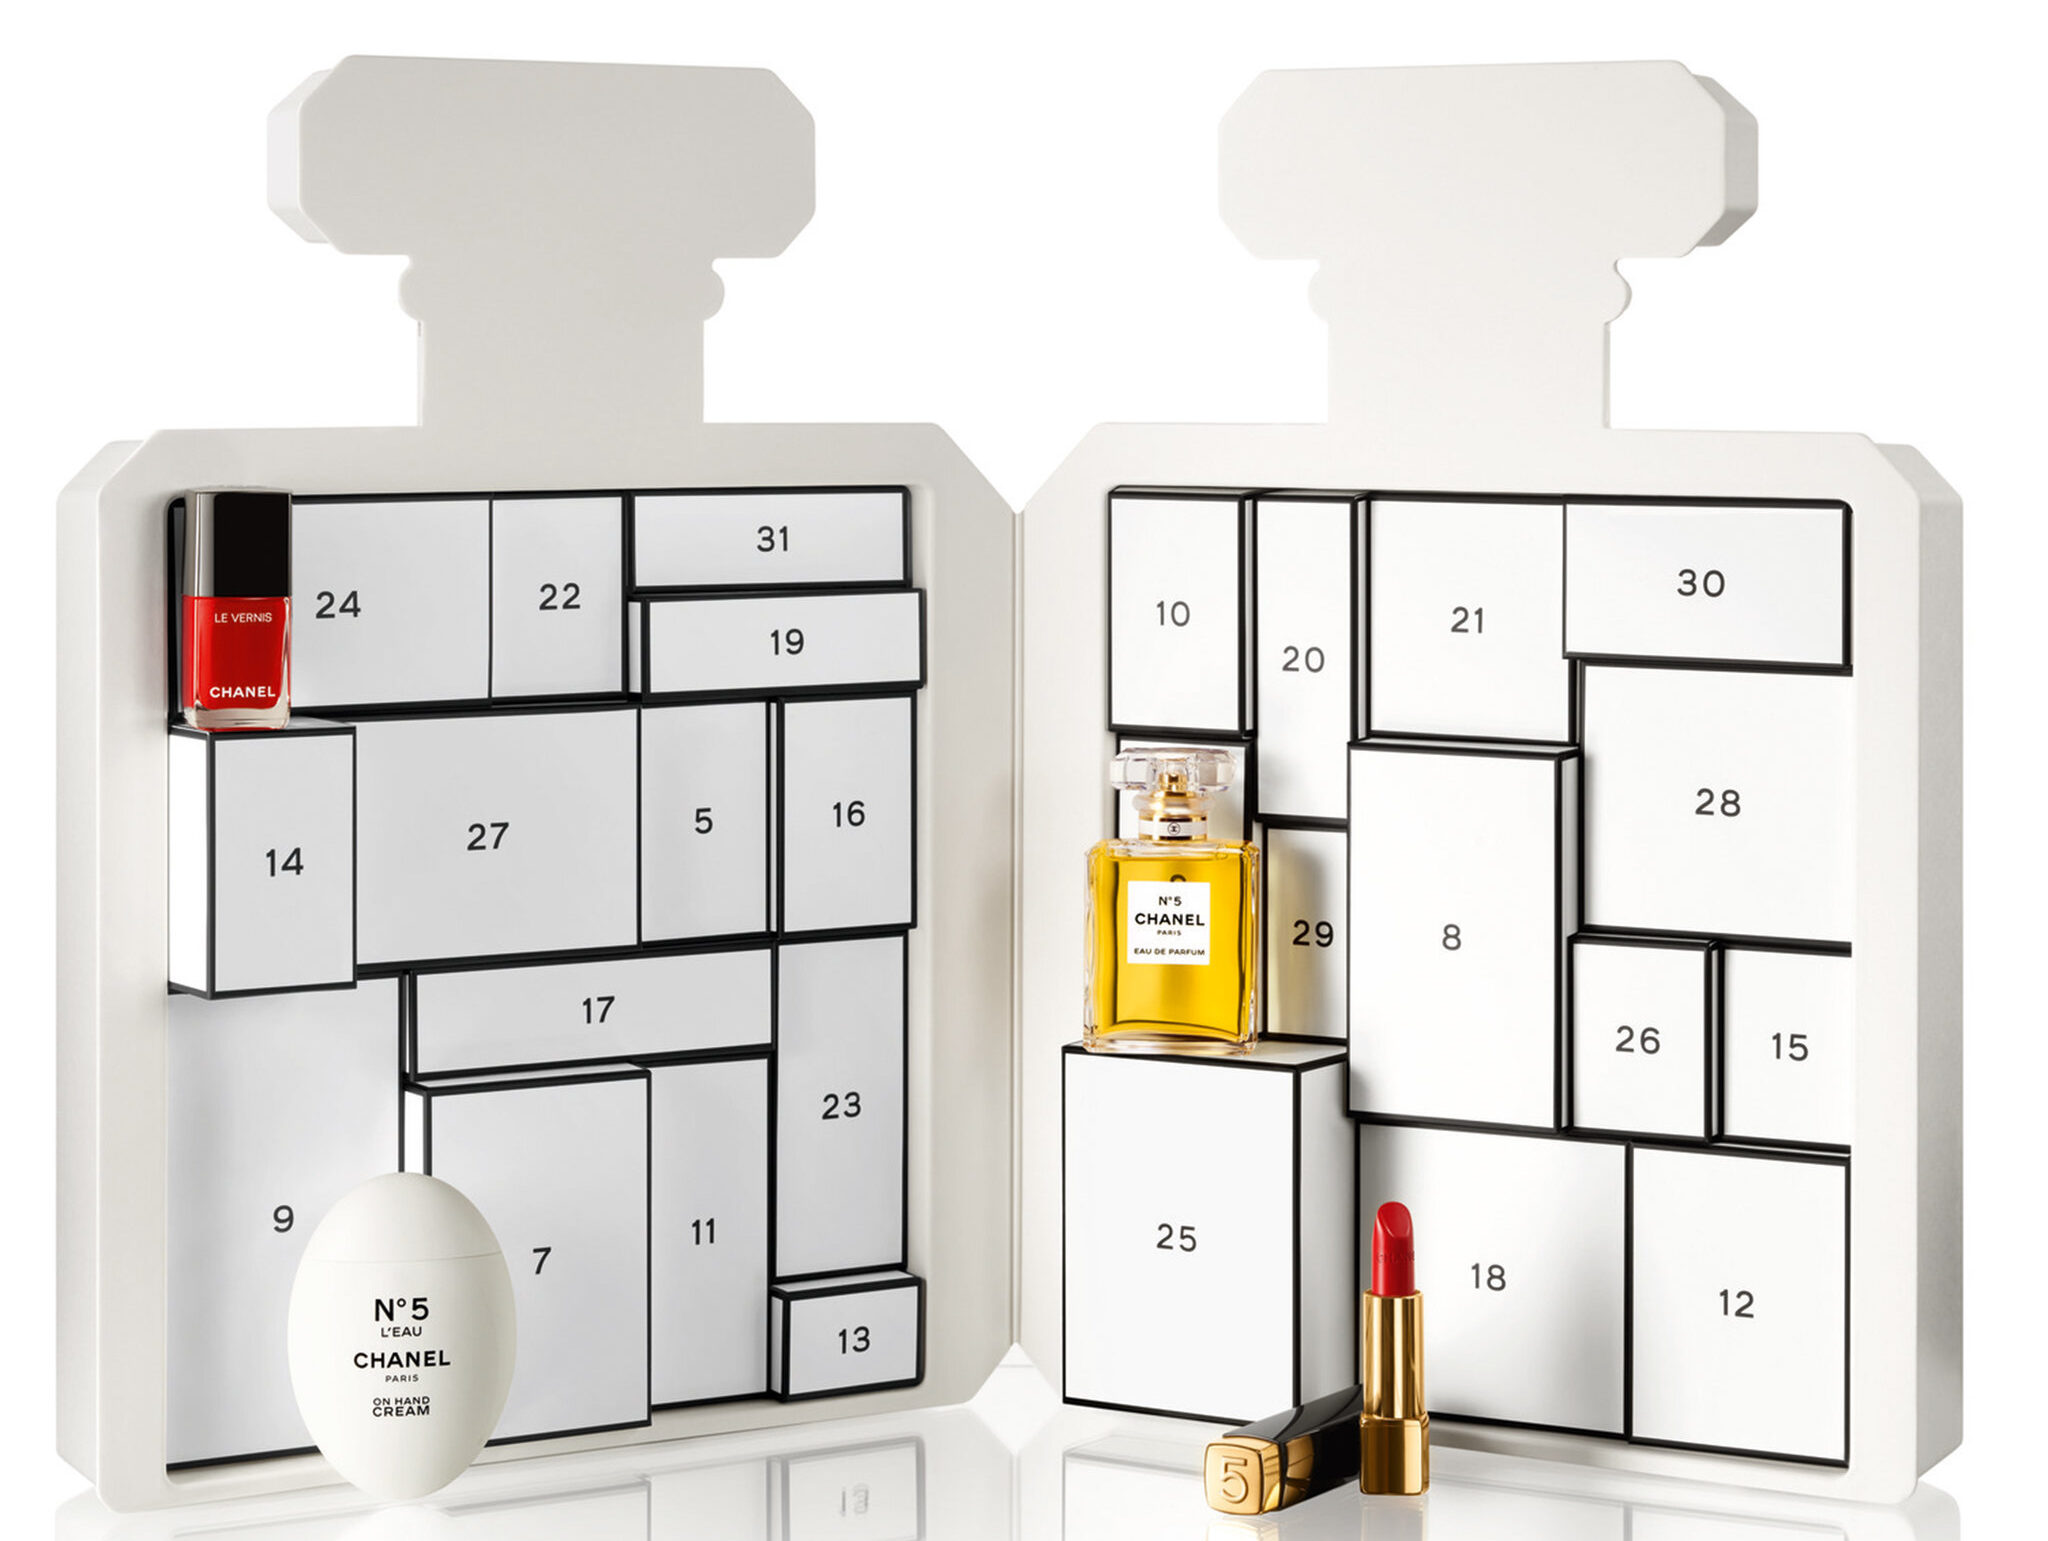 Why everyone on TikTok talking about the Chanel advent calendar